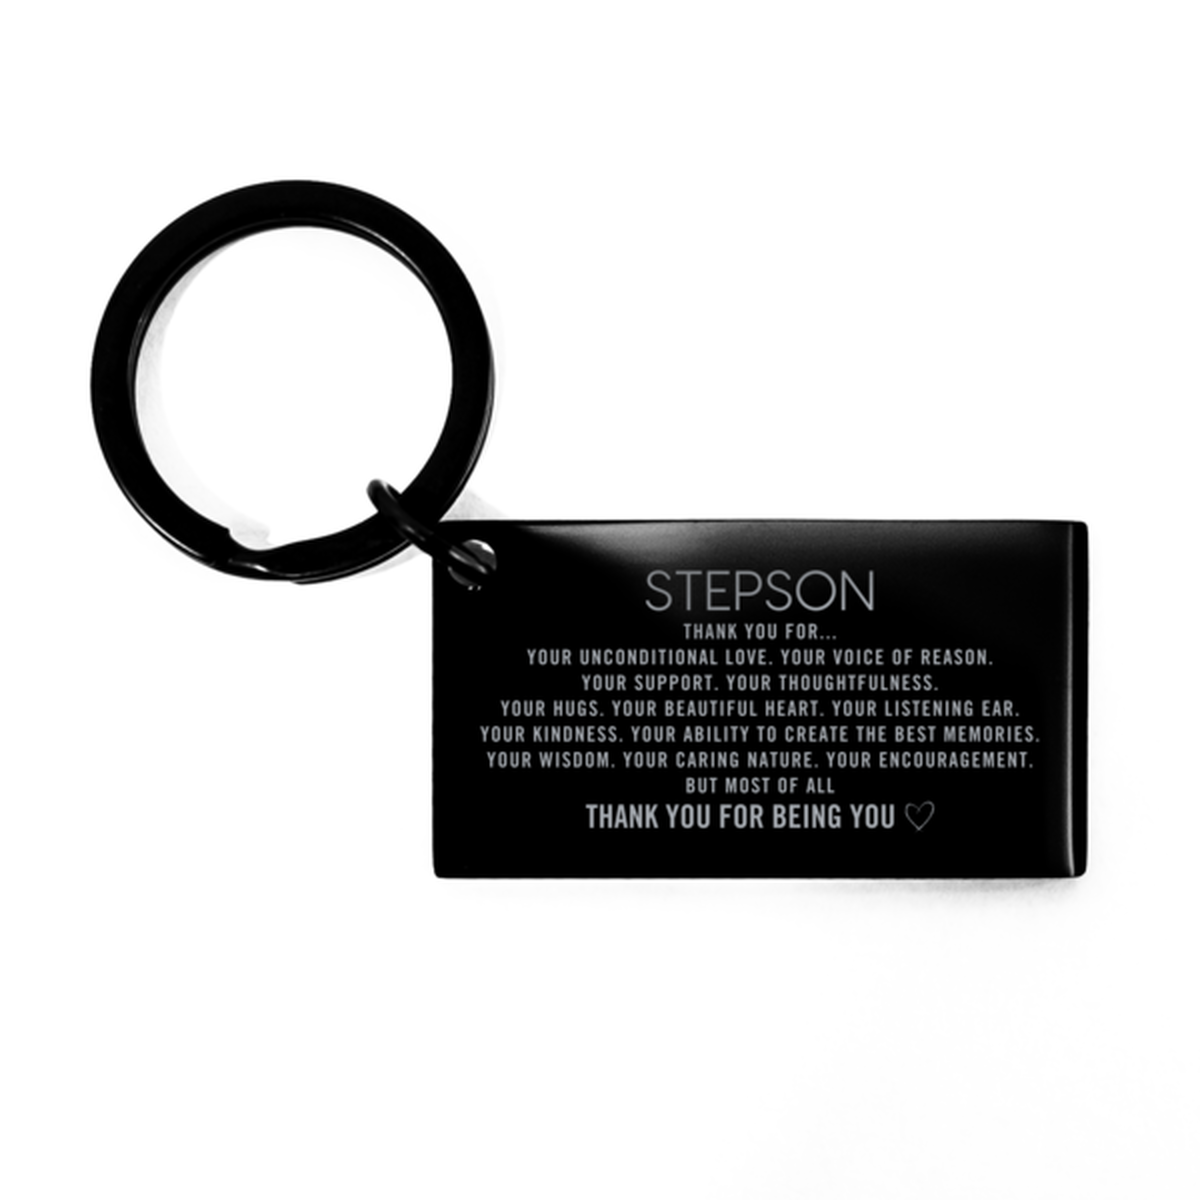 Stepson Keychain Custom, Engraved Gifts For Stepson Christmas Graduation Birthday Gifts for Men Women Stepson Thank you for Your unconditional love